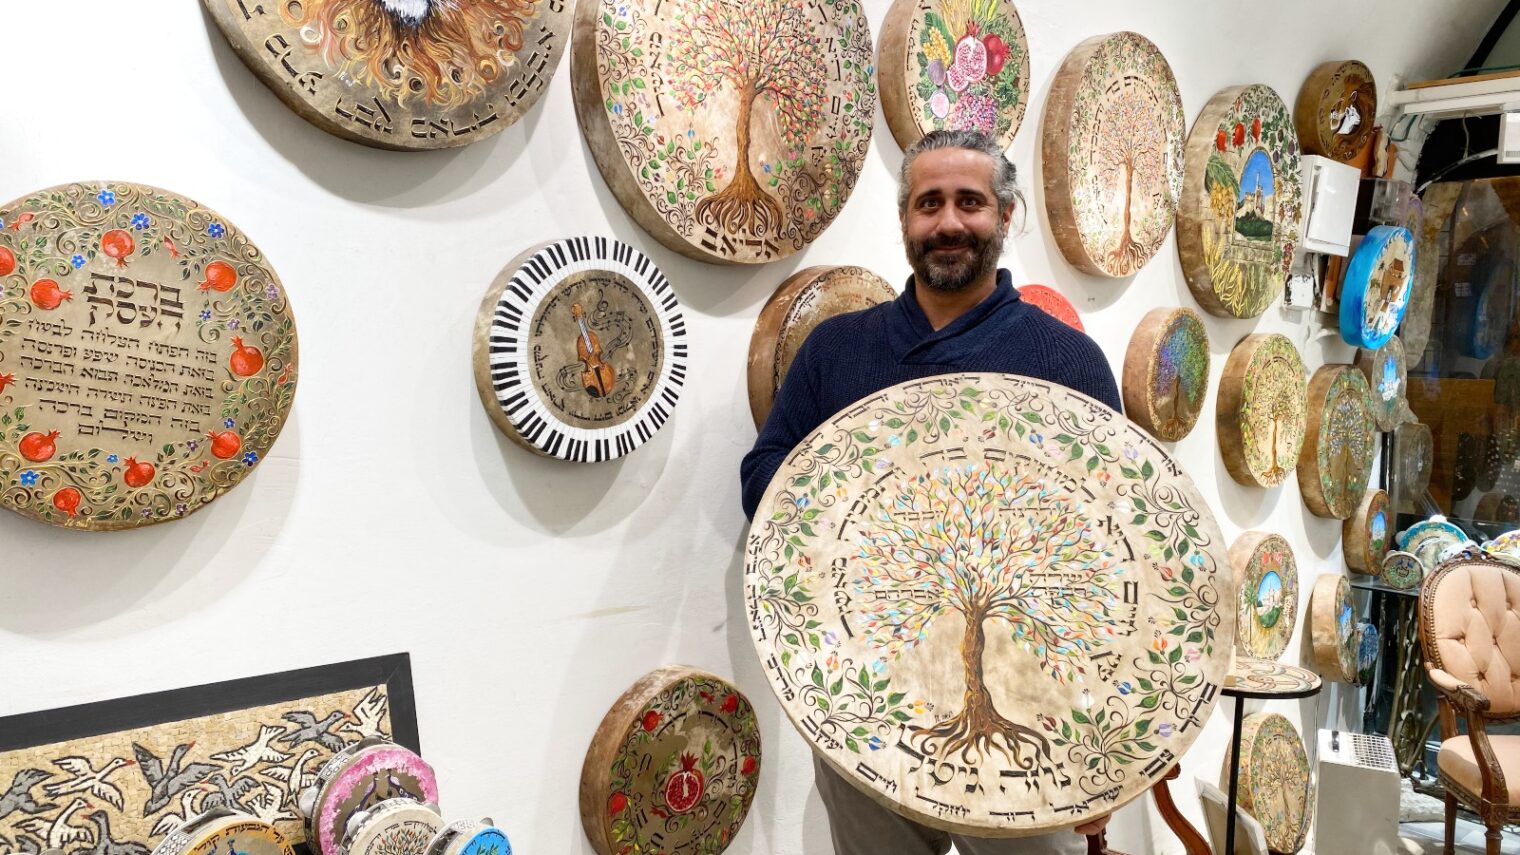 Rina gallery’s Chanan Eliav with parchment-on-wood paintings. Photo by Abigail Klein Leichman